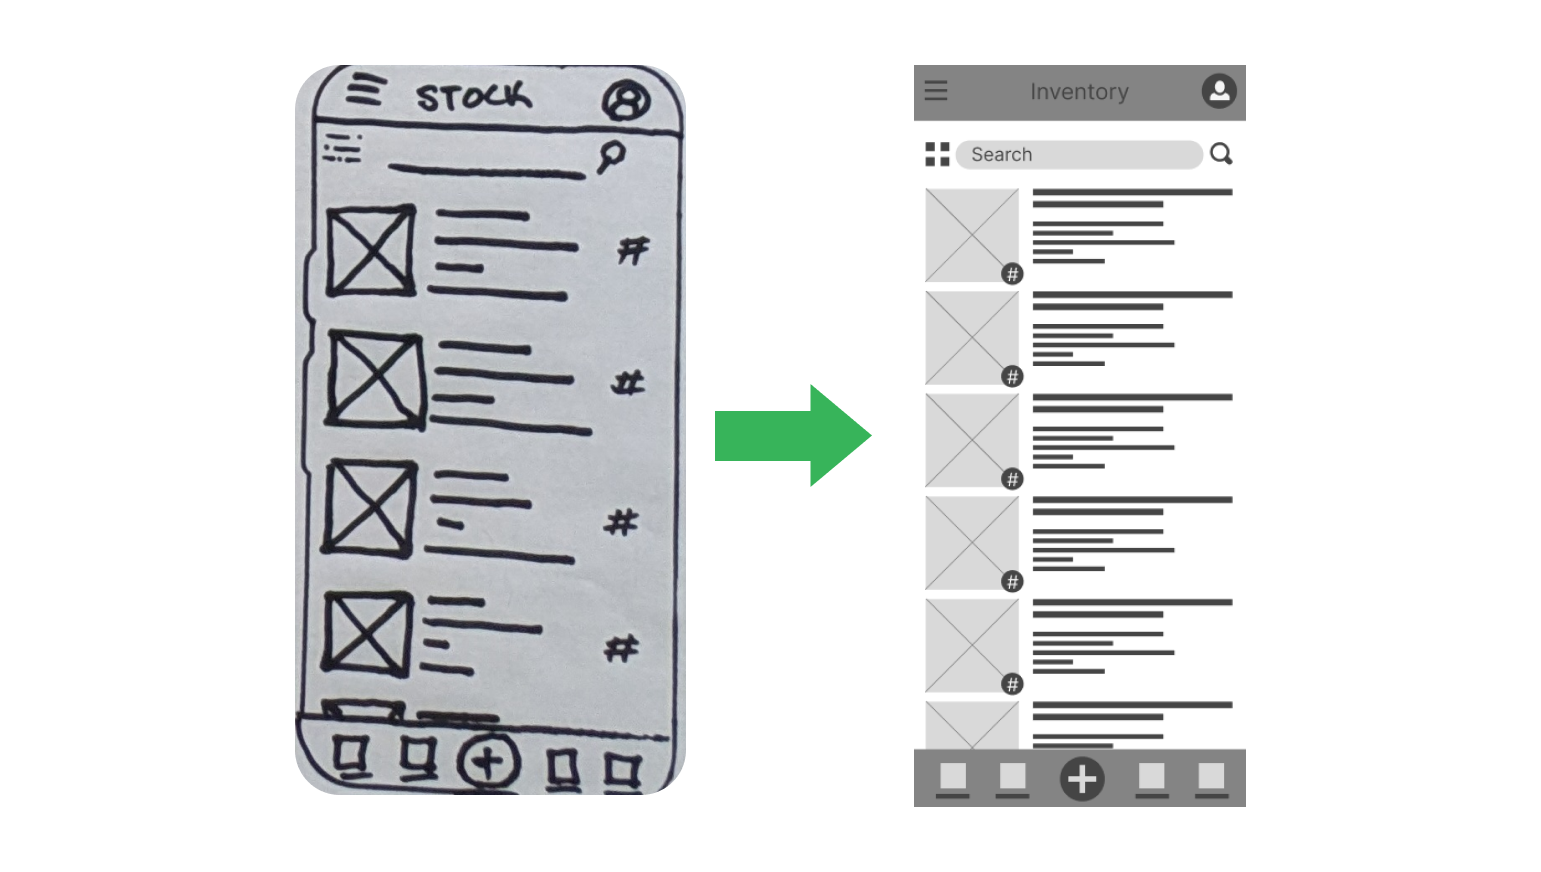 A screen shot showing the transformation of the inventory page from the original rough sketch on the left to the low fidelity digital wireframe on the right. A green arrow points from left to right, indicating the transformation.